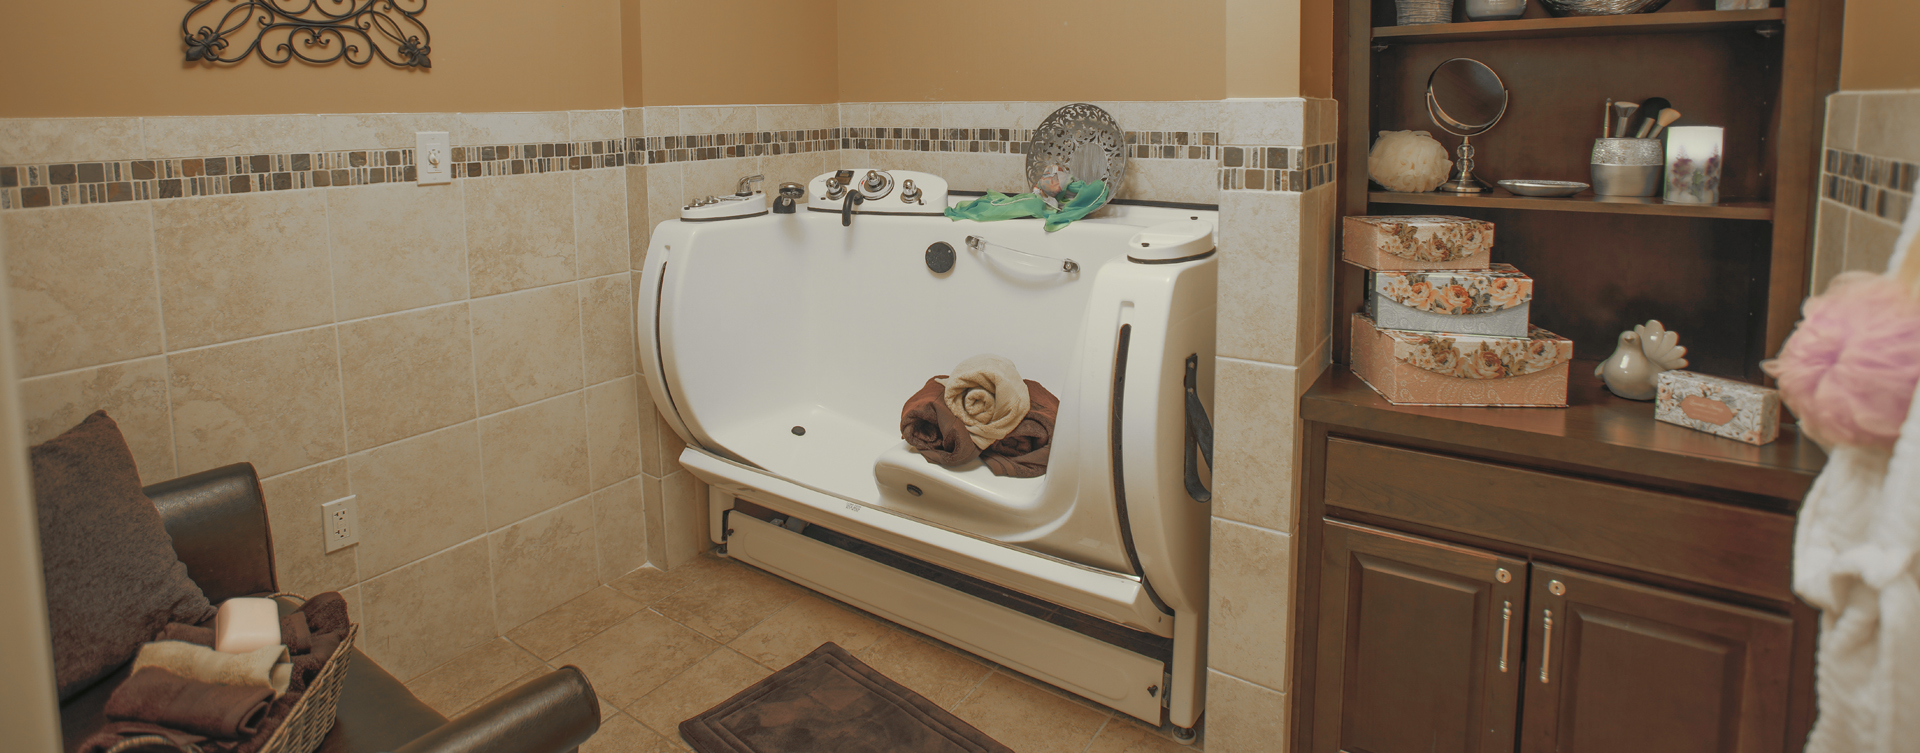 With an easy access design, our whirlpool allows you to enjoy a warm bath safely and comfortably at Bickford of Carmel